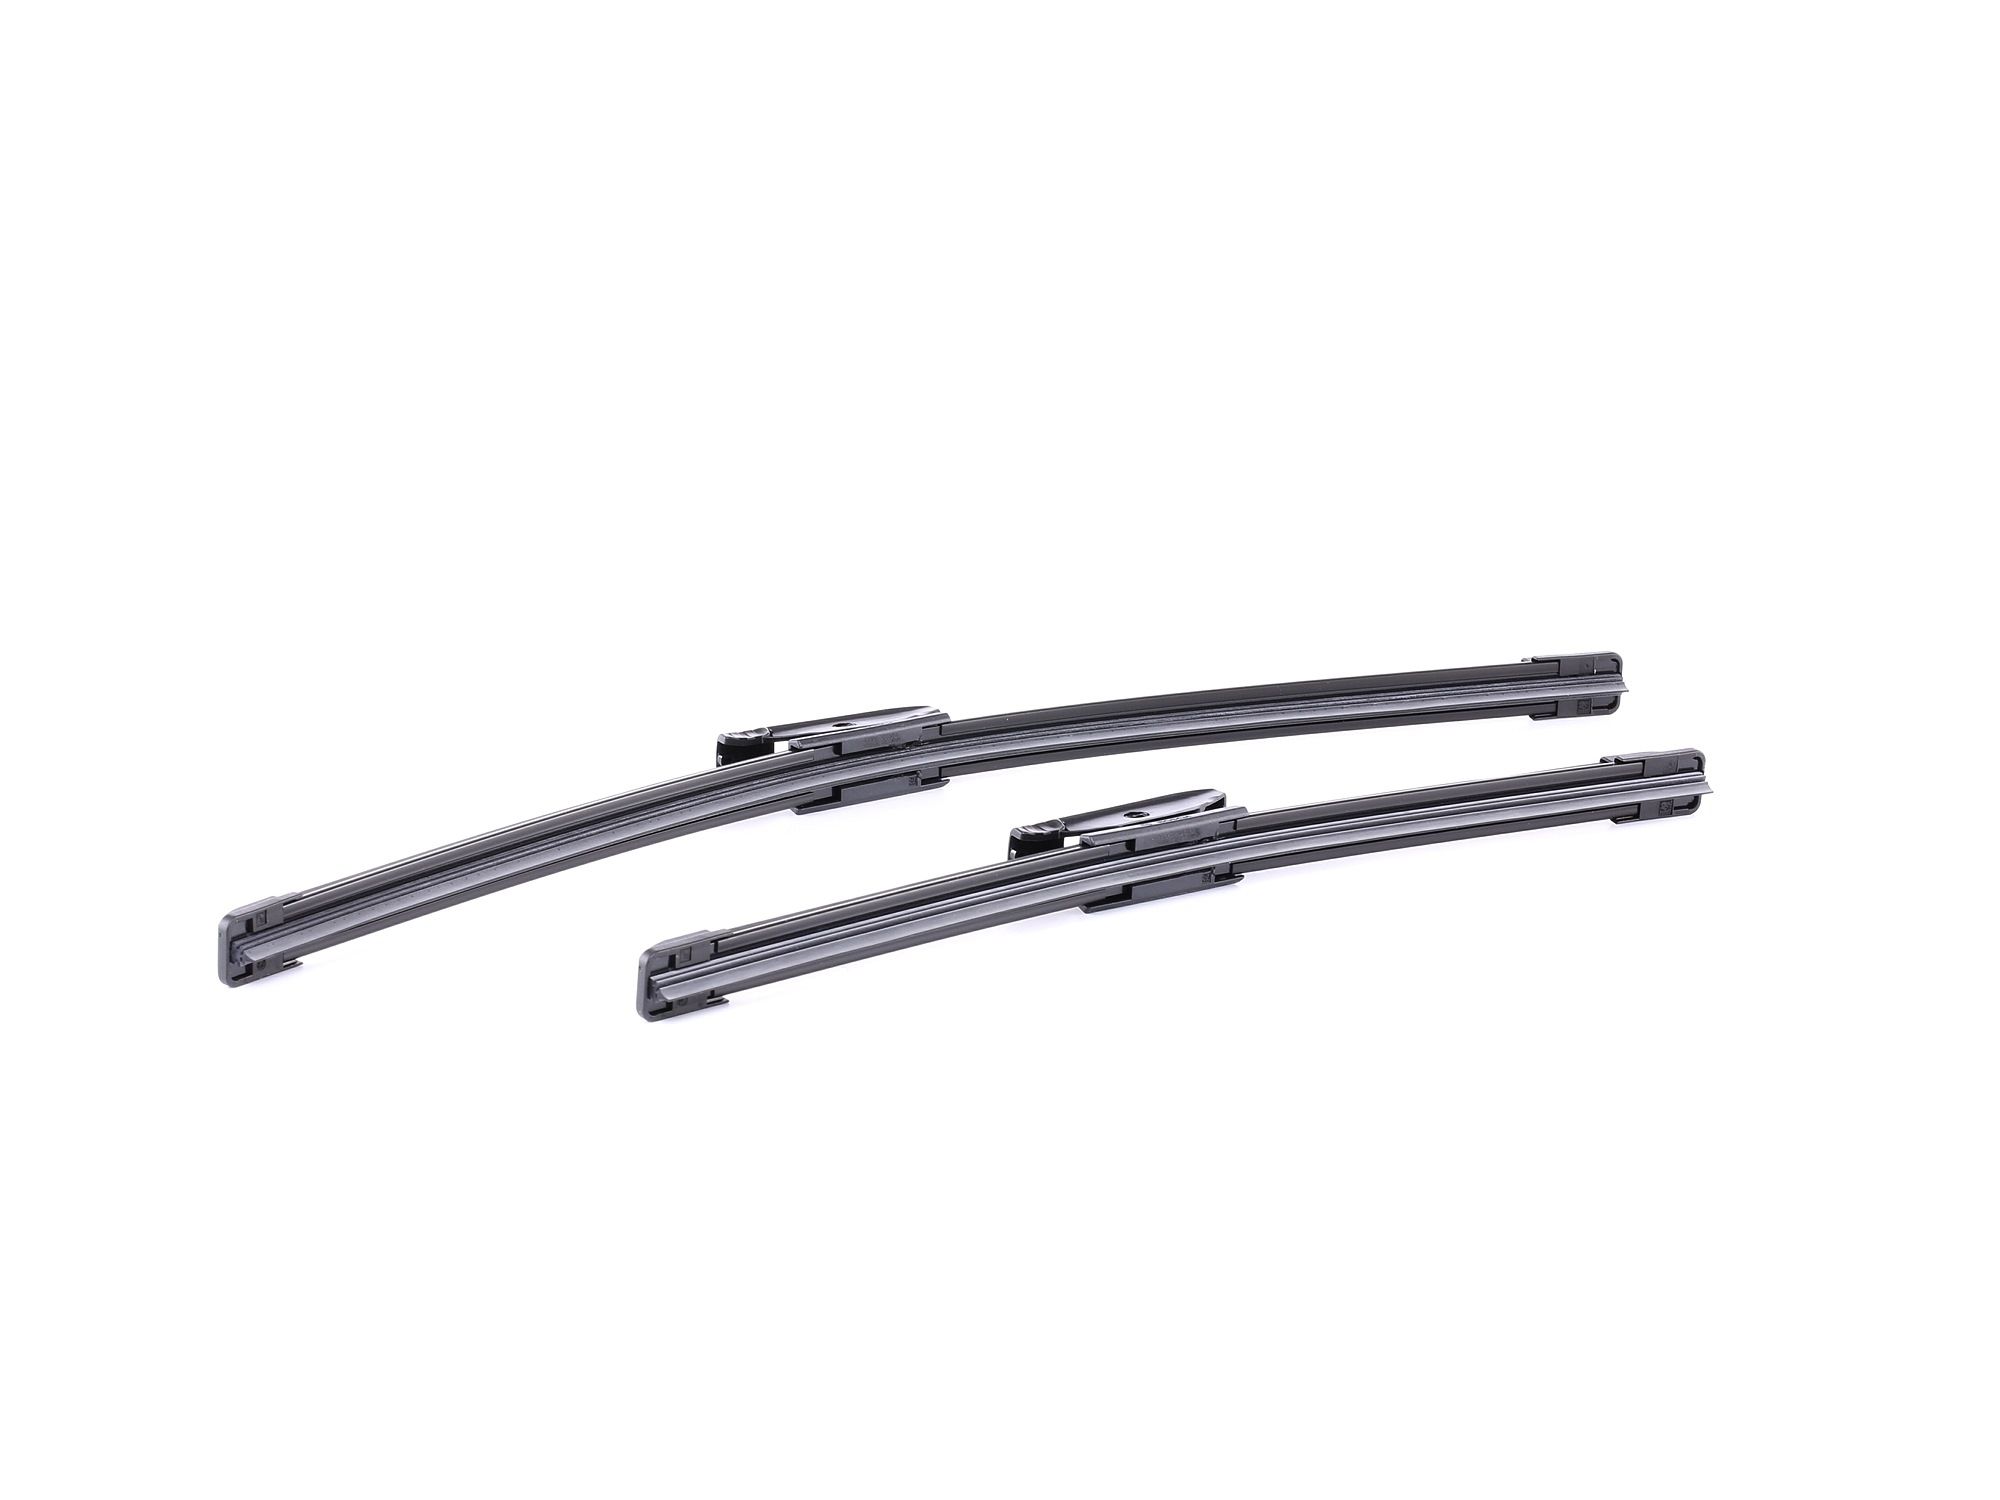 BOSCH Aerotwin 3 397 014 095 Wiper blade 500, 360 mm, Beam, for left-hand drive vehicles